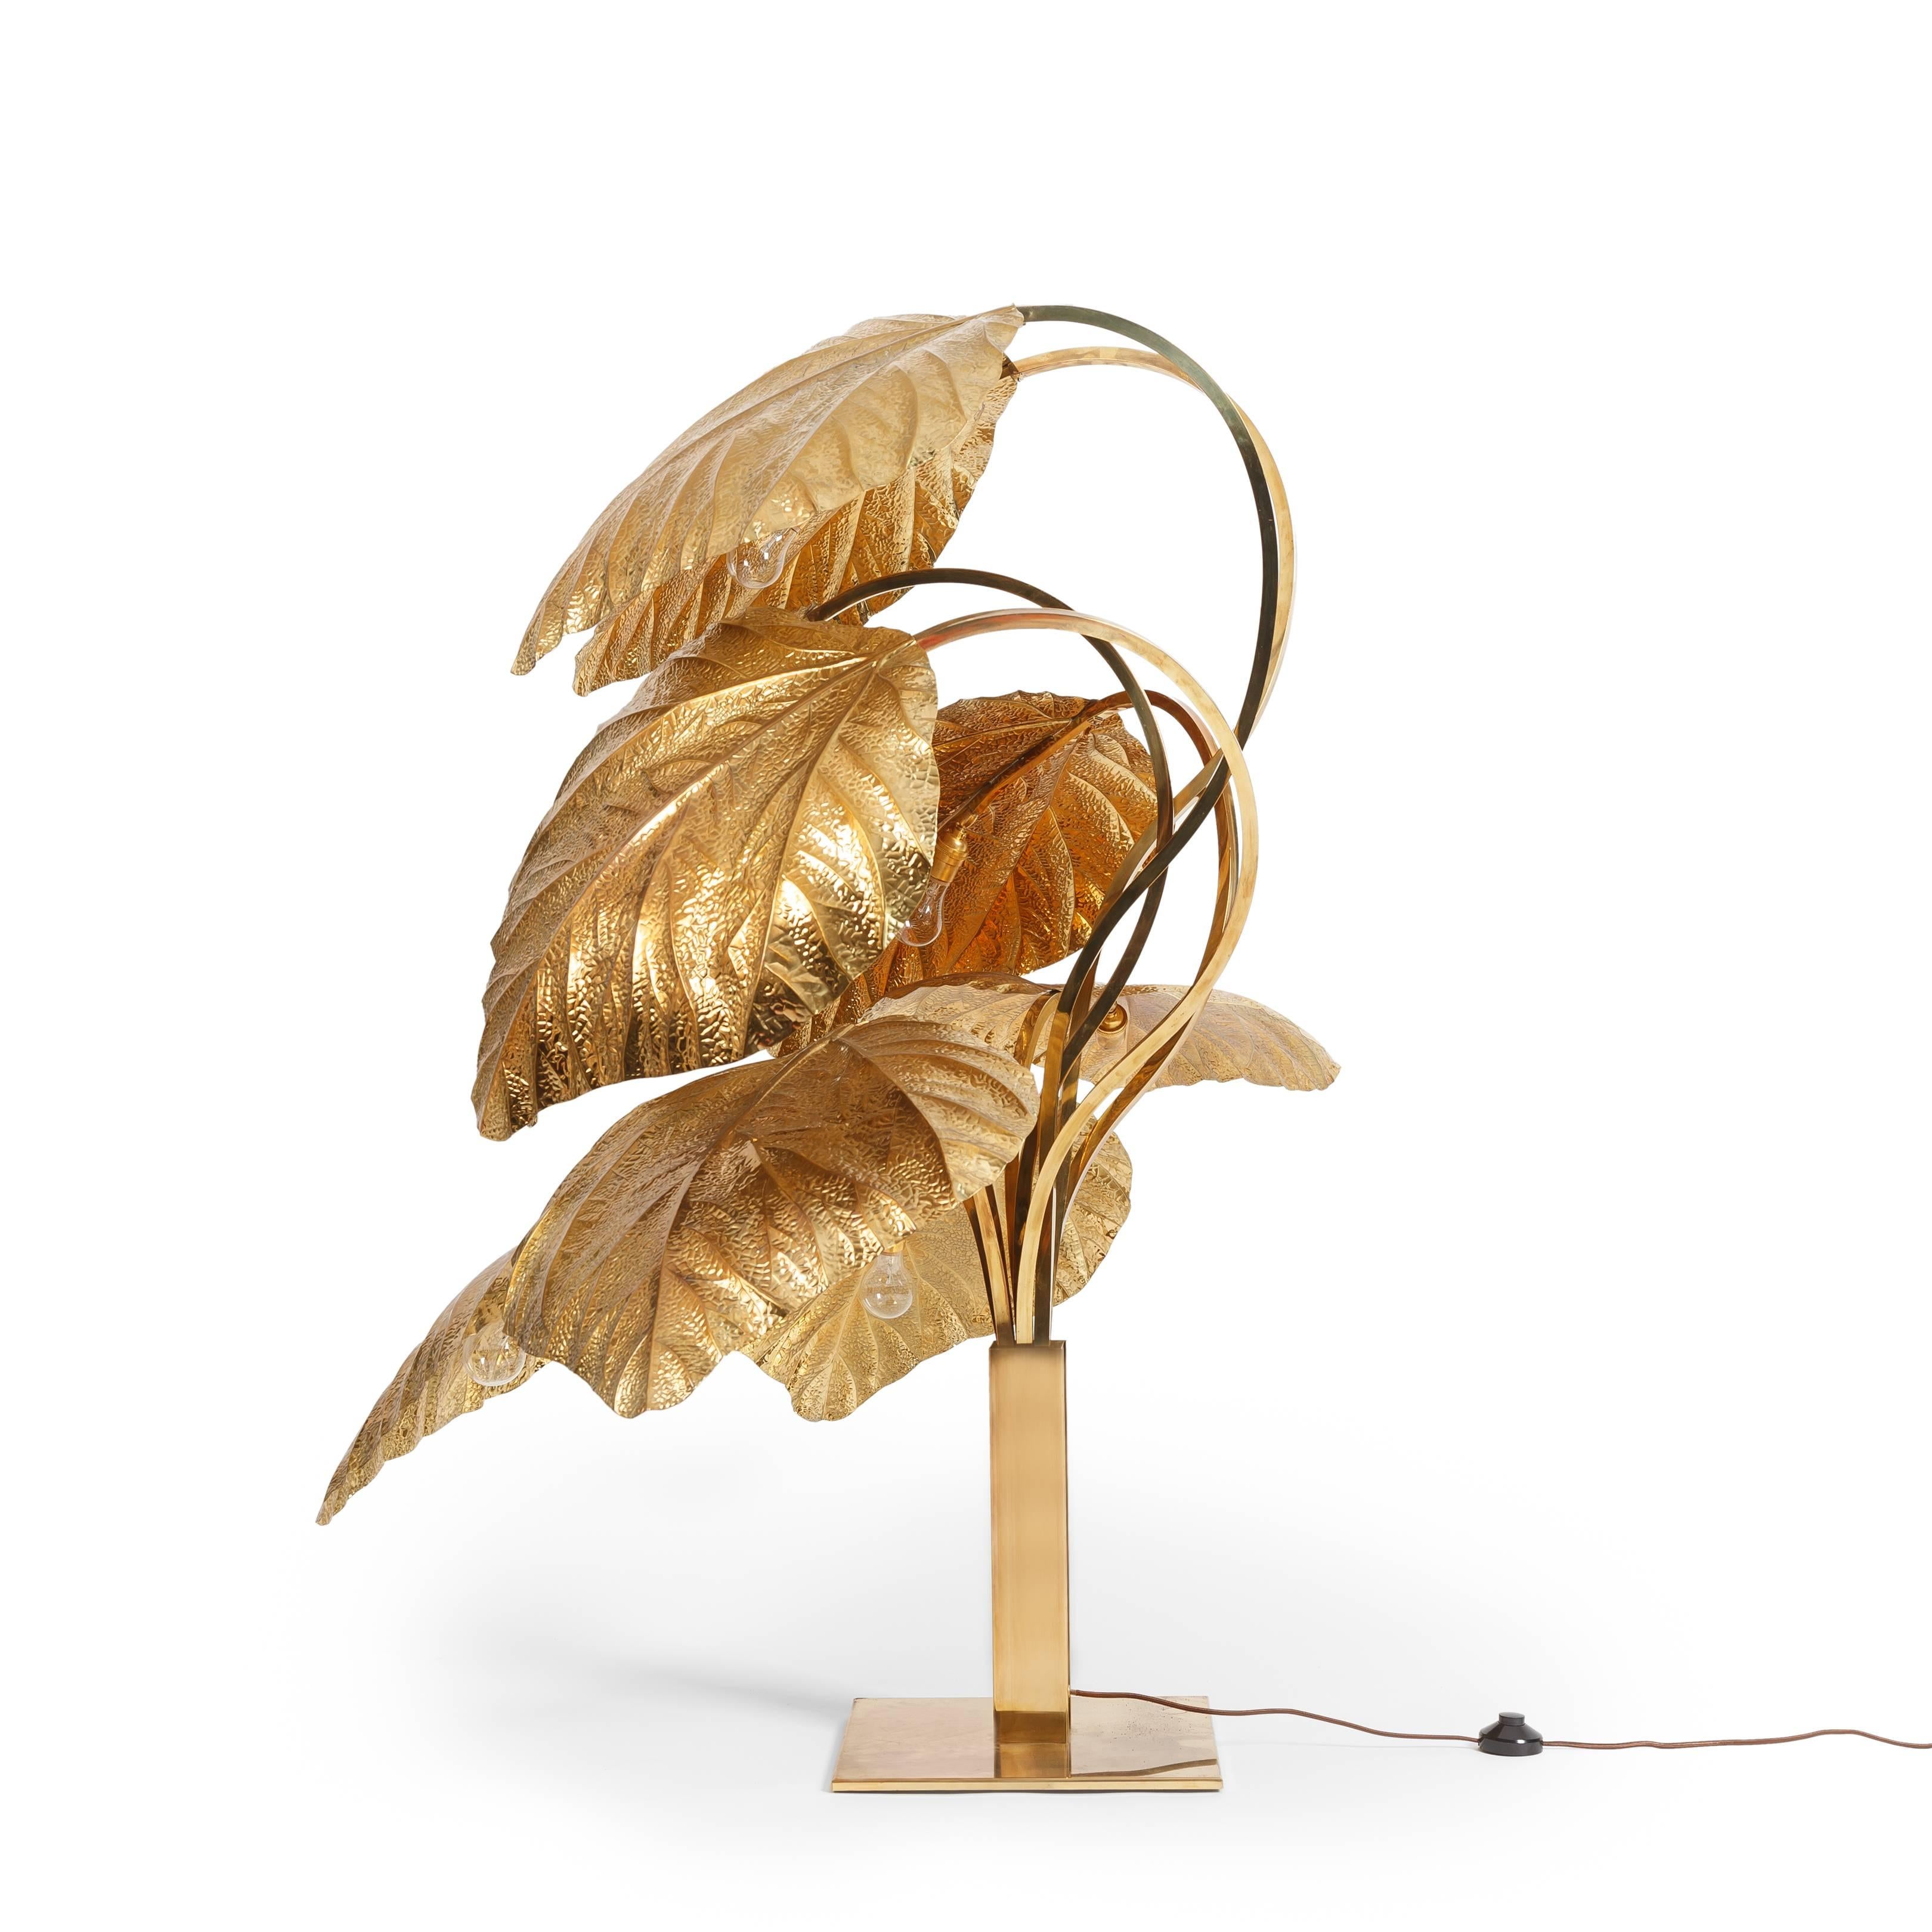 Large and elegant brass 9-leaf rhubarb floor lamp with embossed leaves, hand-made using repoussé and chasing techniques, mounted on stems collected in square cylinder attached to square base, Italy, 1980-90s.  Gilt-lacquered patinated finish on the